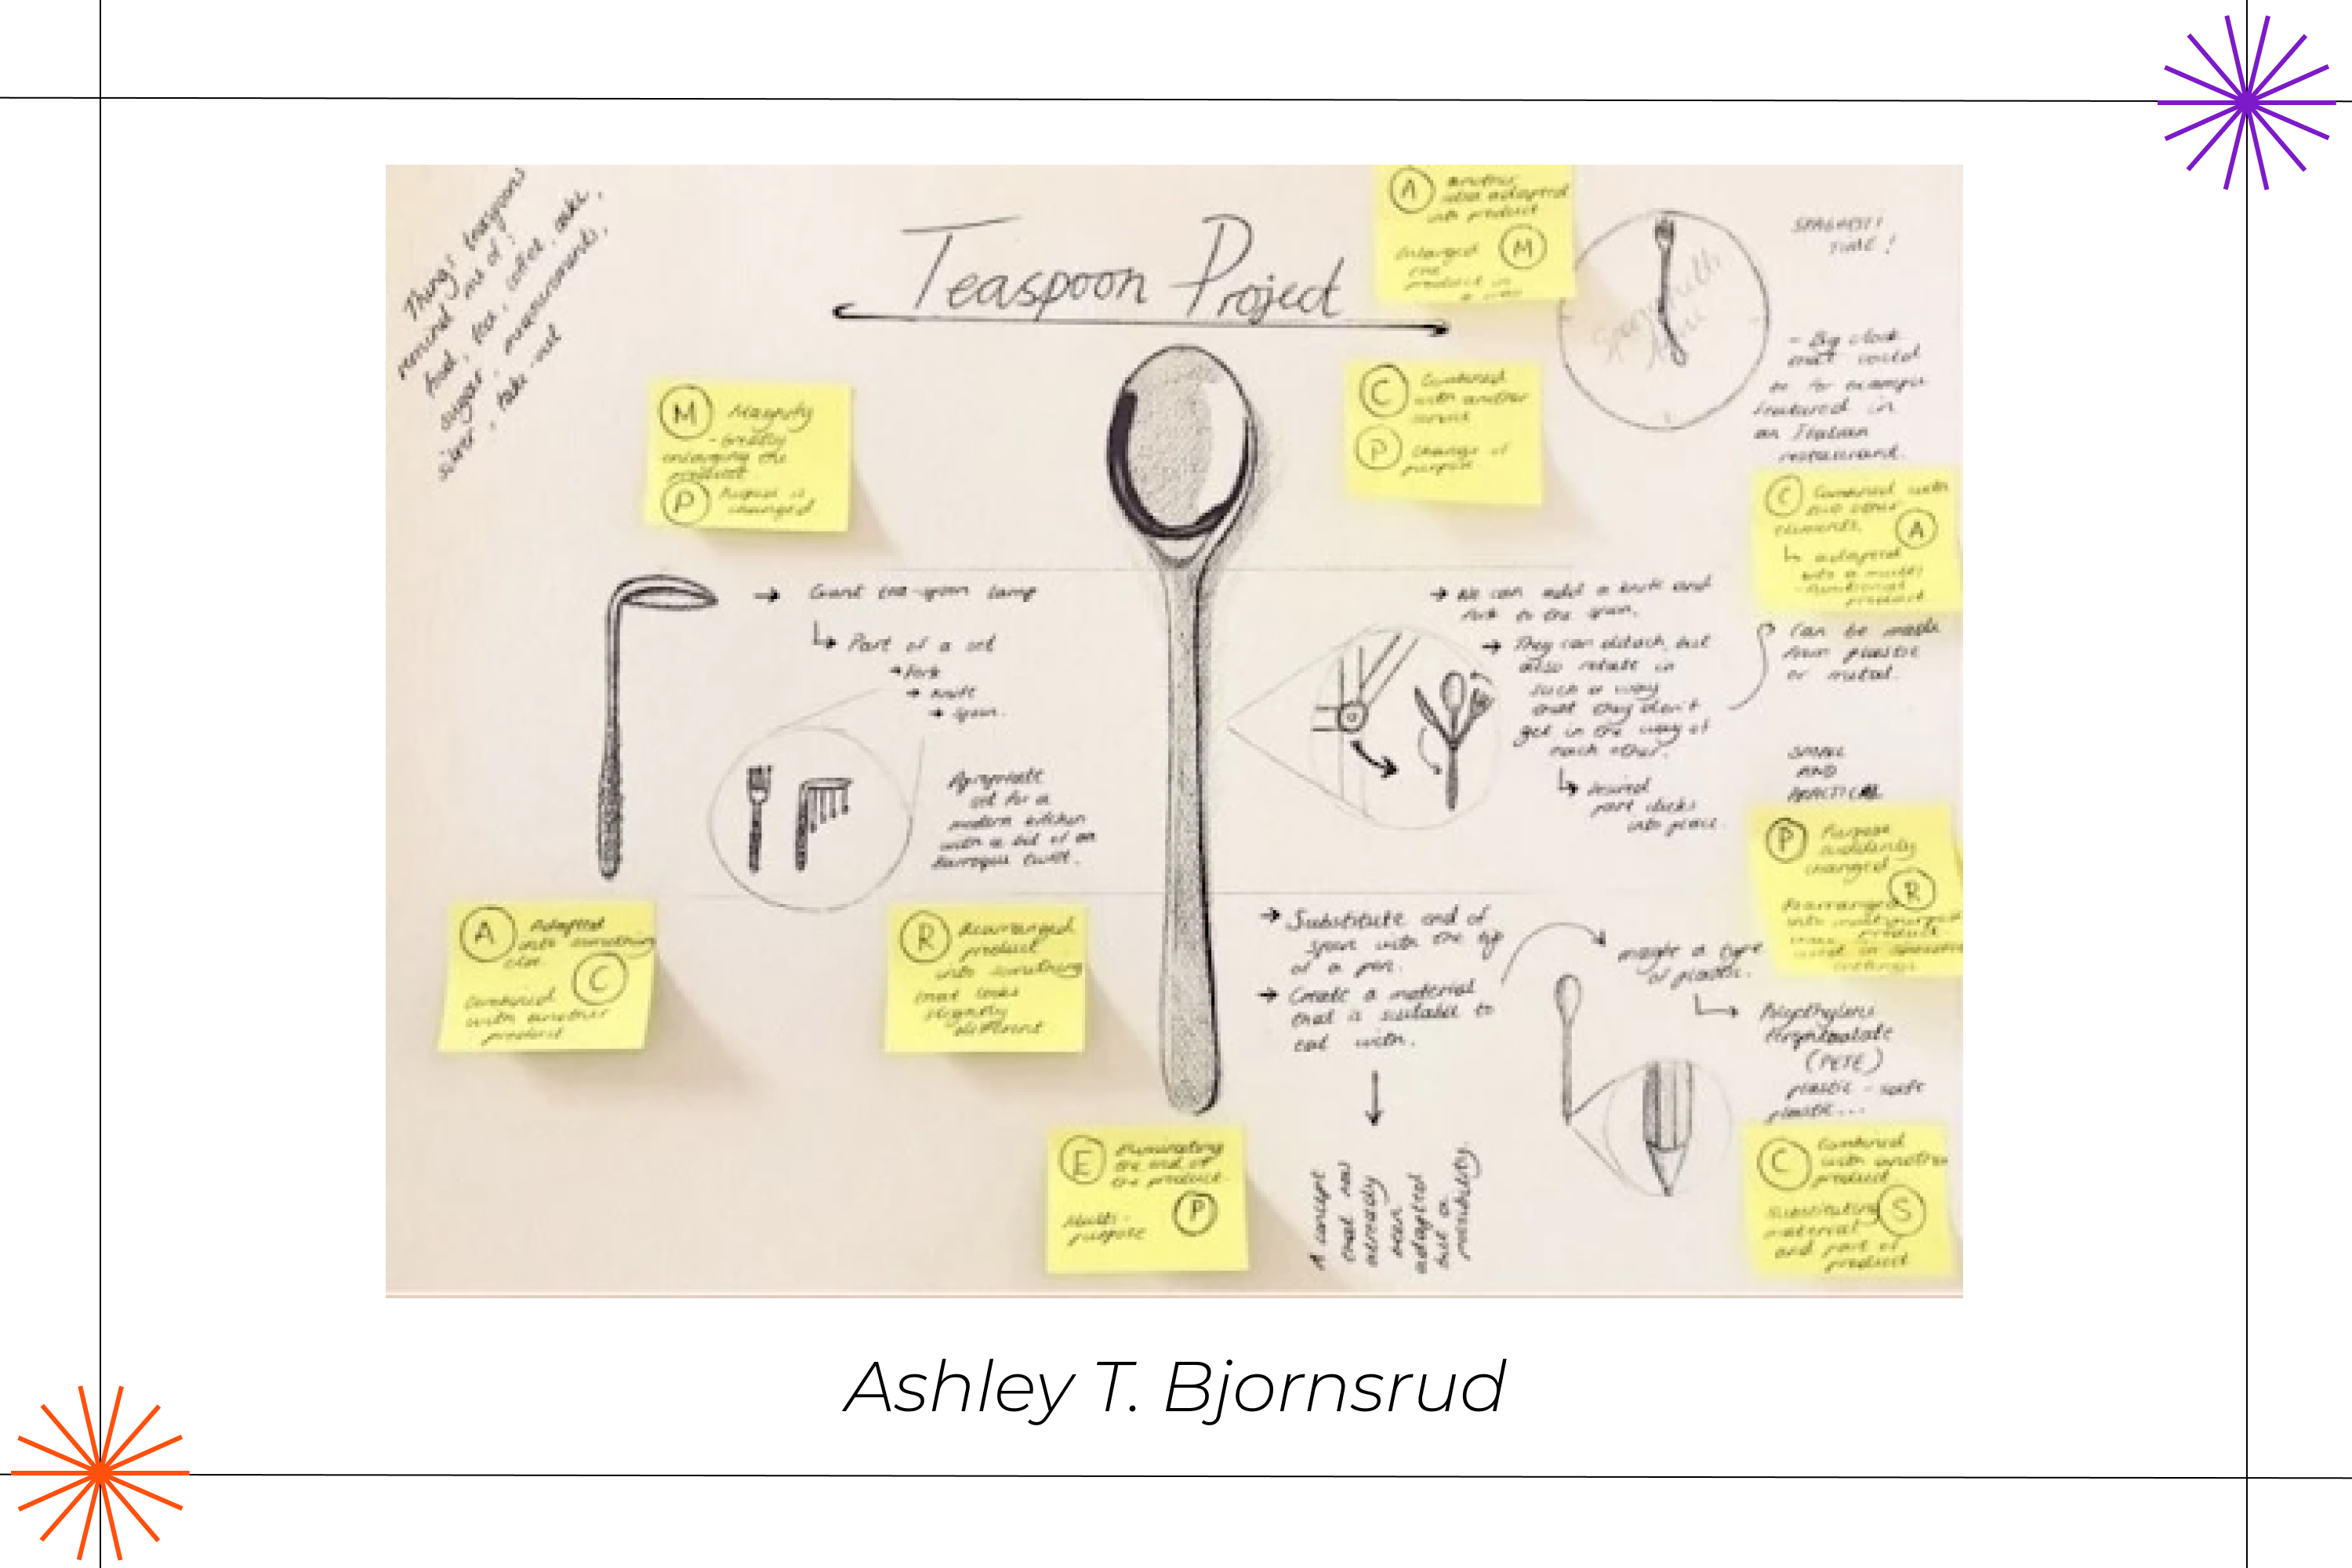 A table with descriptions of the Teaspoon Project.